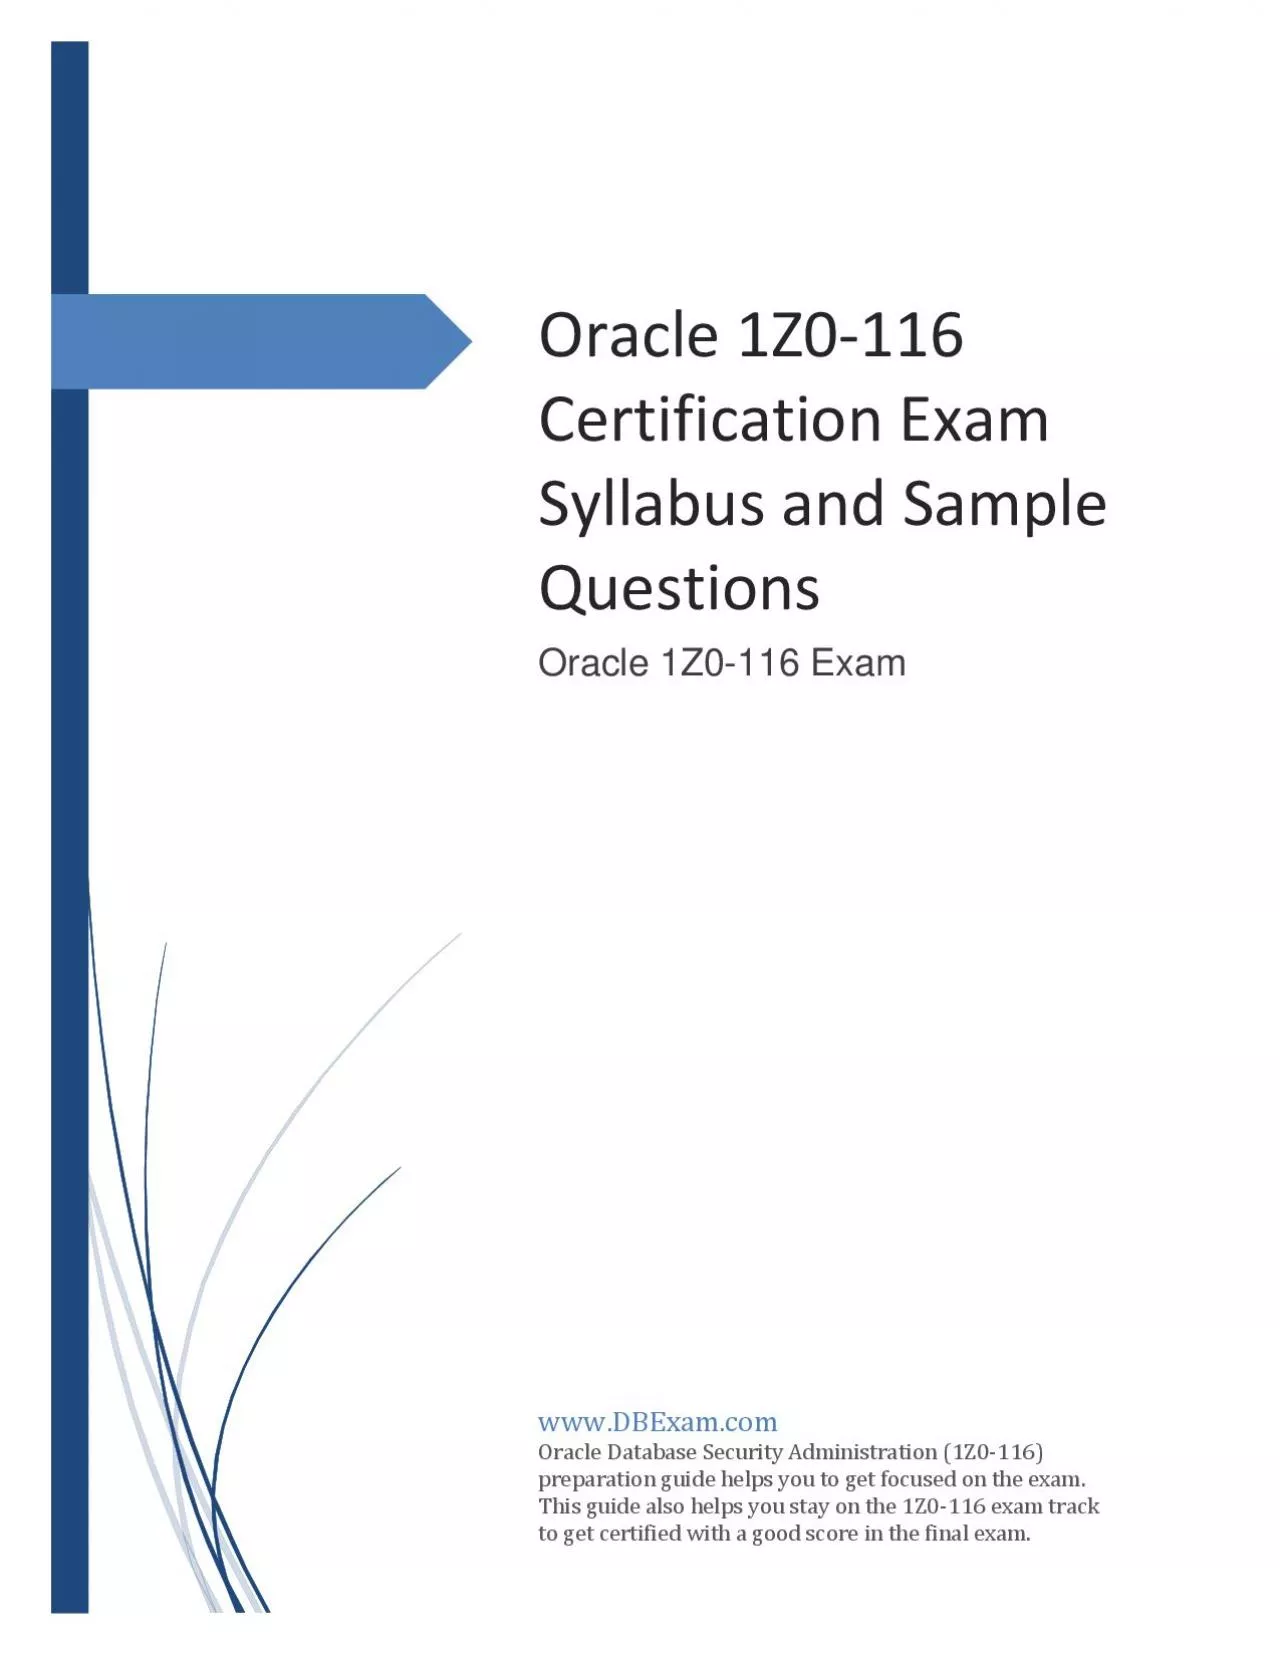 Oracle 1Z0-116 Certification Exam Syllabus and Sample Questions PDF